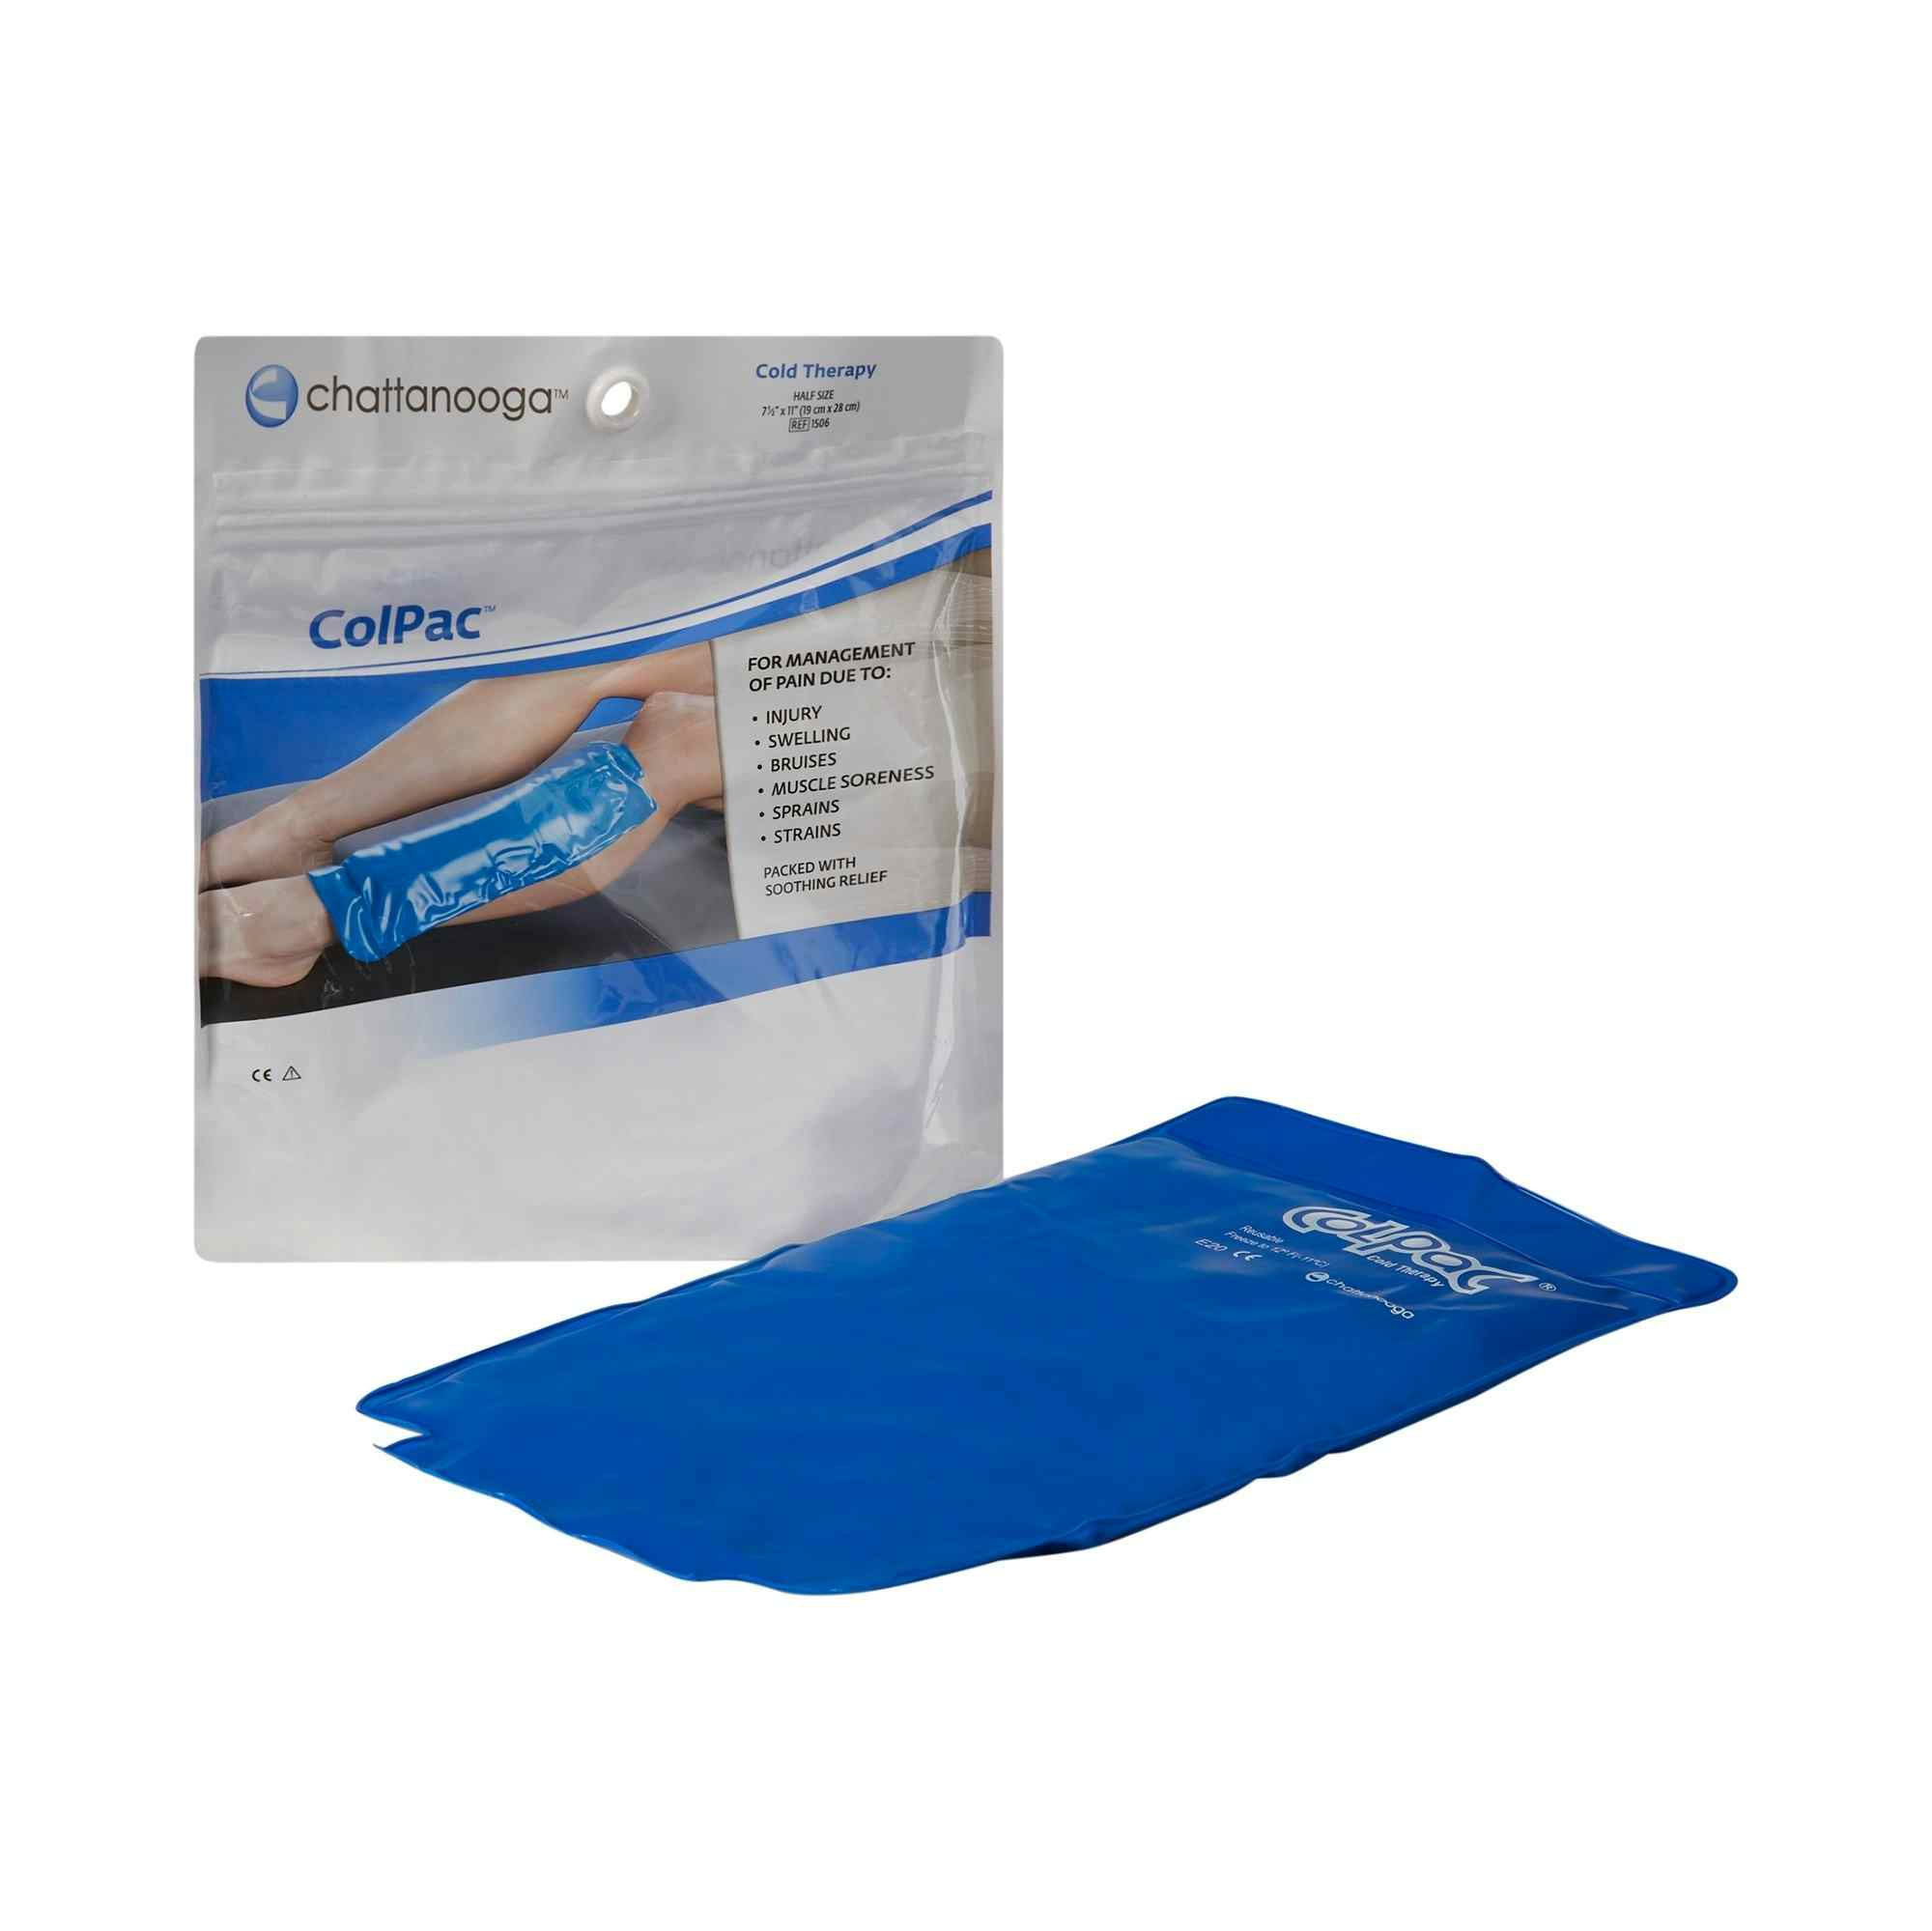 ColPac Cold Therapy General Purpose Cold Pack, 1506, 7.5 X 11" - 1 Each